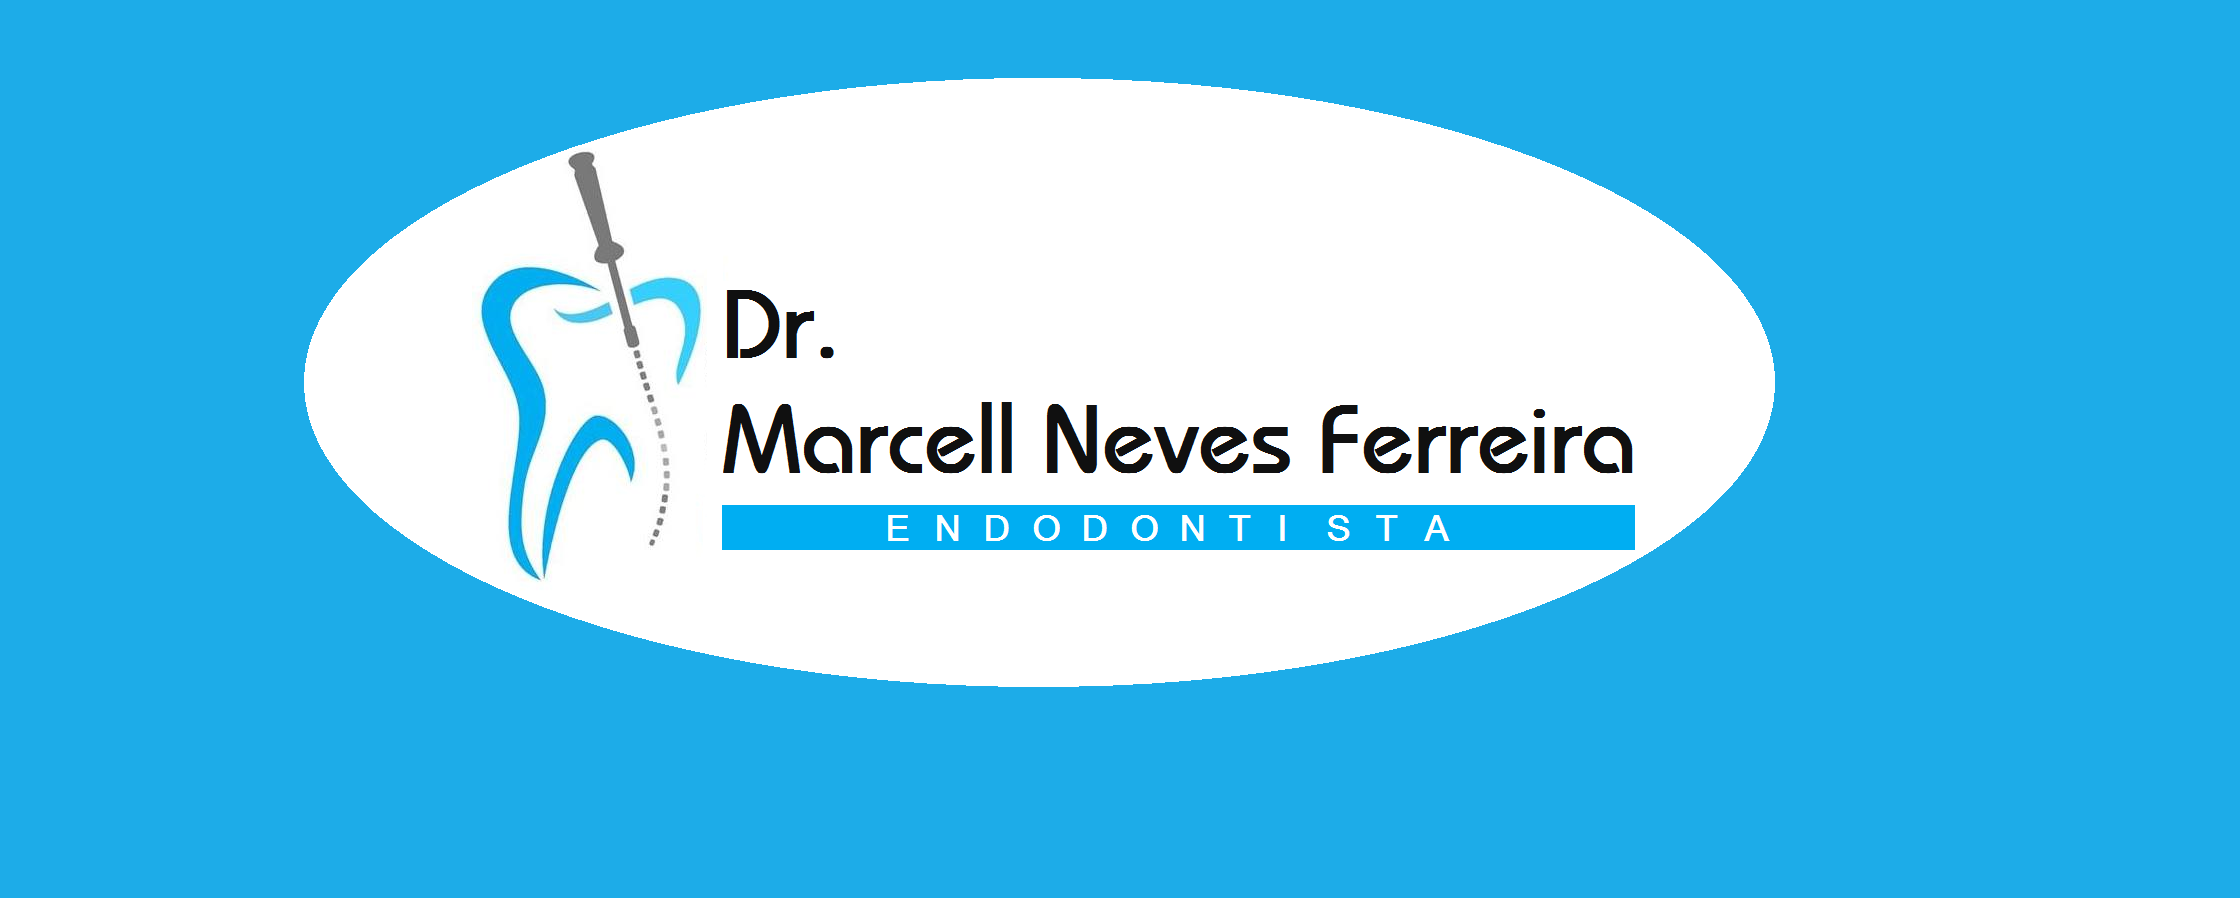 Dr Marcell